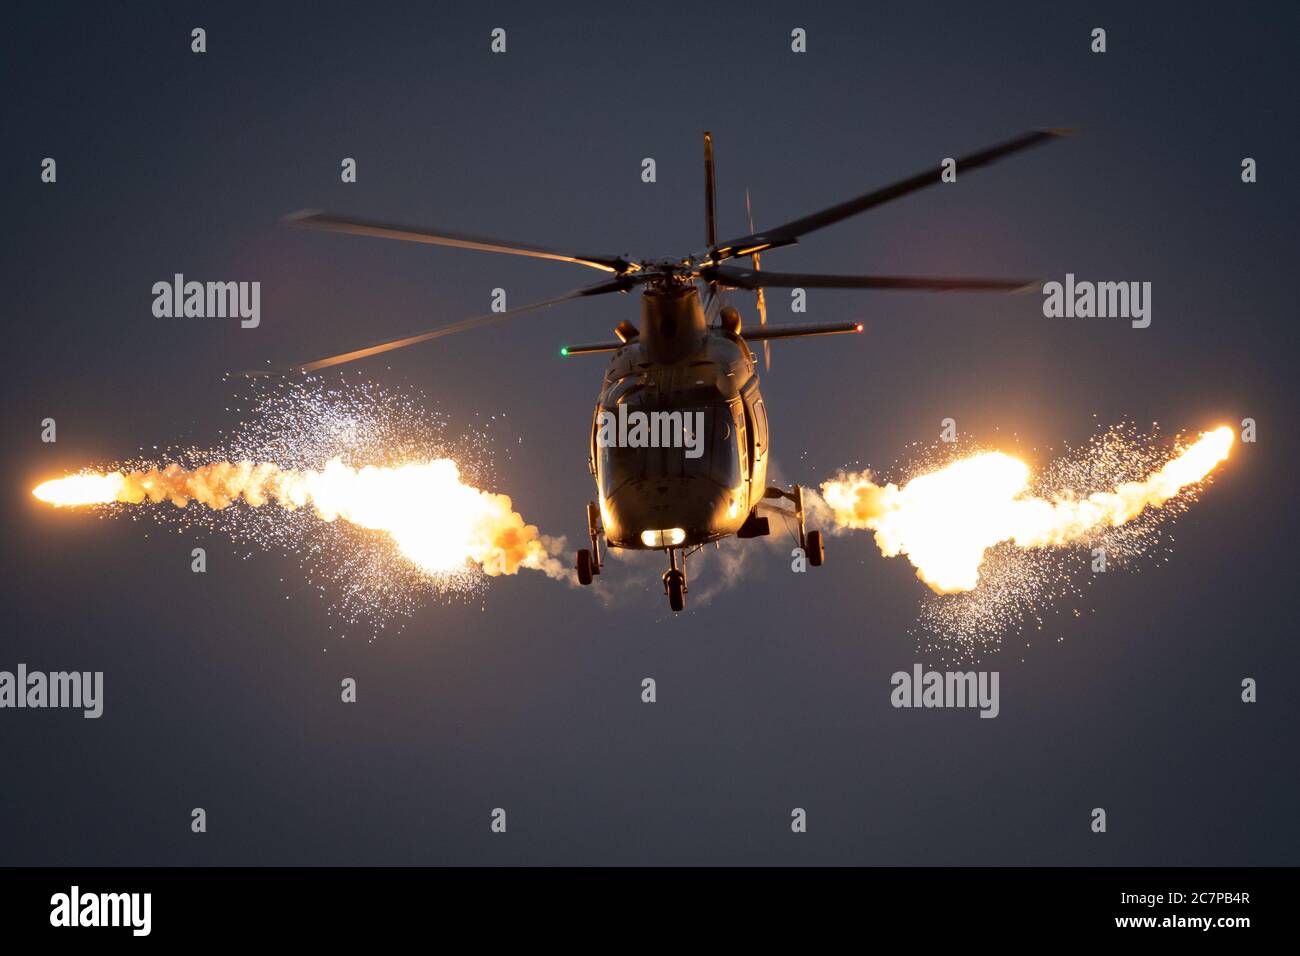 Military helicopter in flight firing off flare decoys at night. Stock Photo